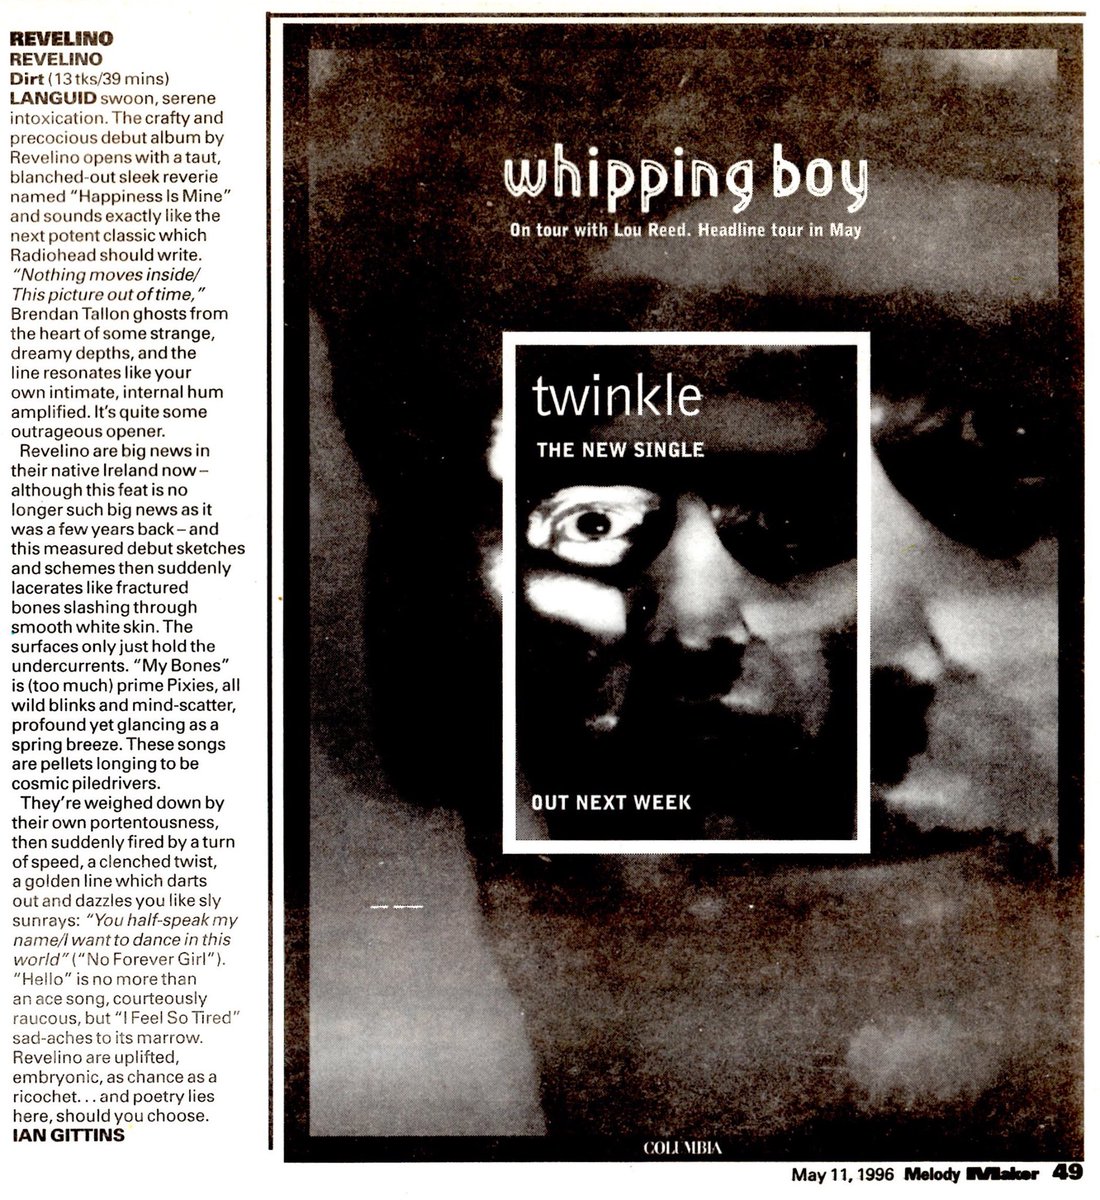 Two of the ultimate No Disco bands @WhippingBoyBand & @revelinomusic especially from Ireland, side by side in a Melody Maker page in 1995. Thanks to Revelino currently rereleasing their eponymous debut album for putting up this!